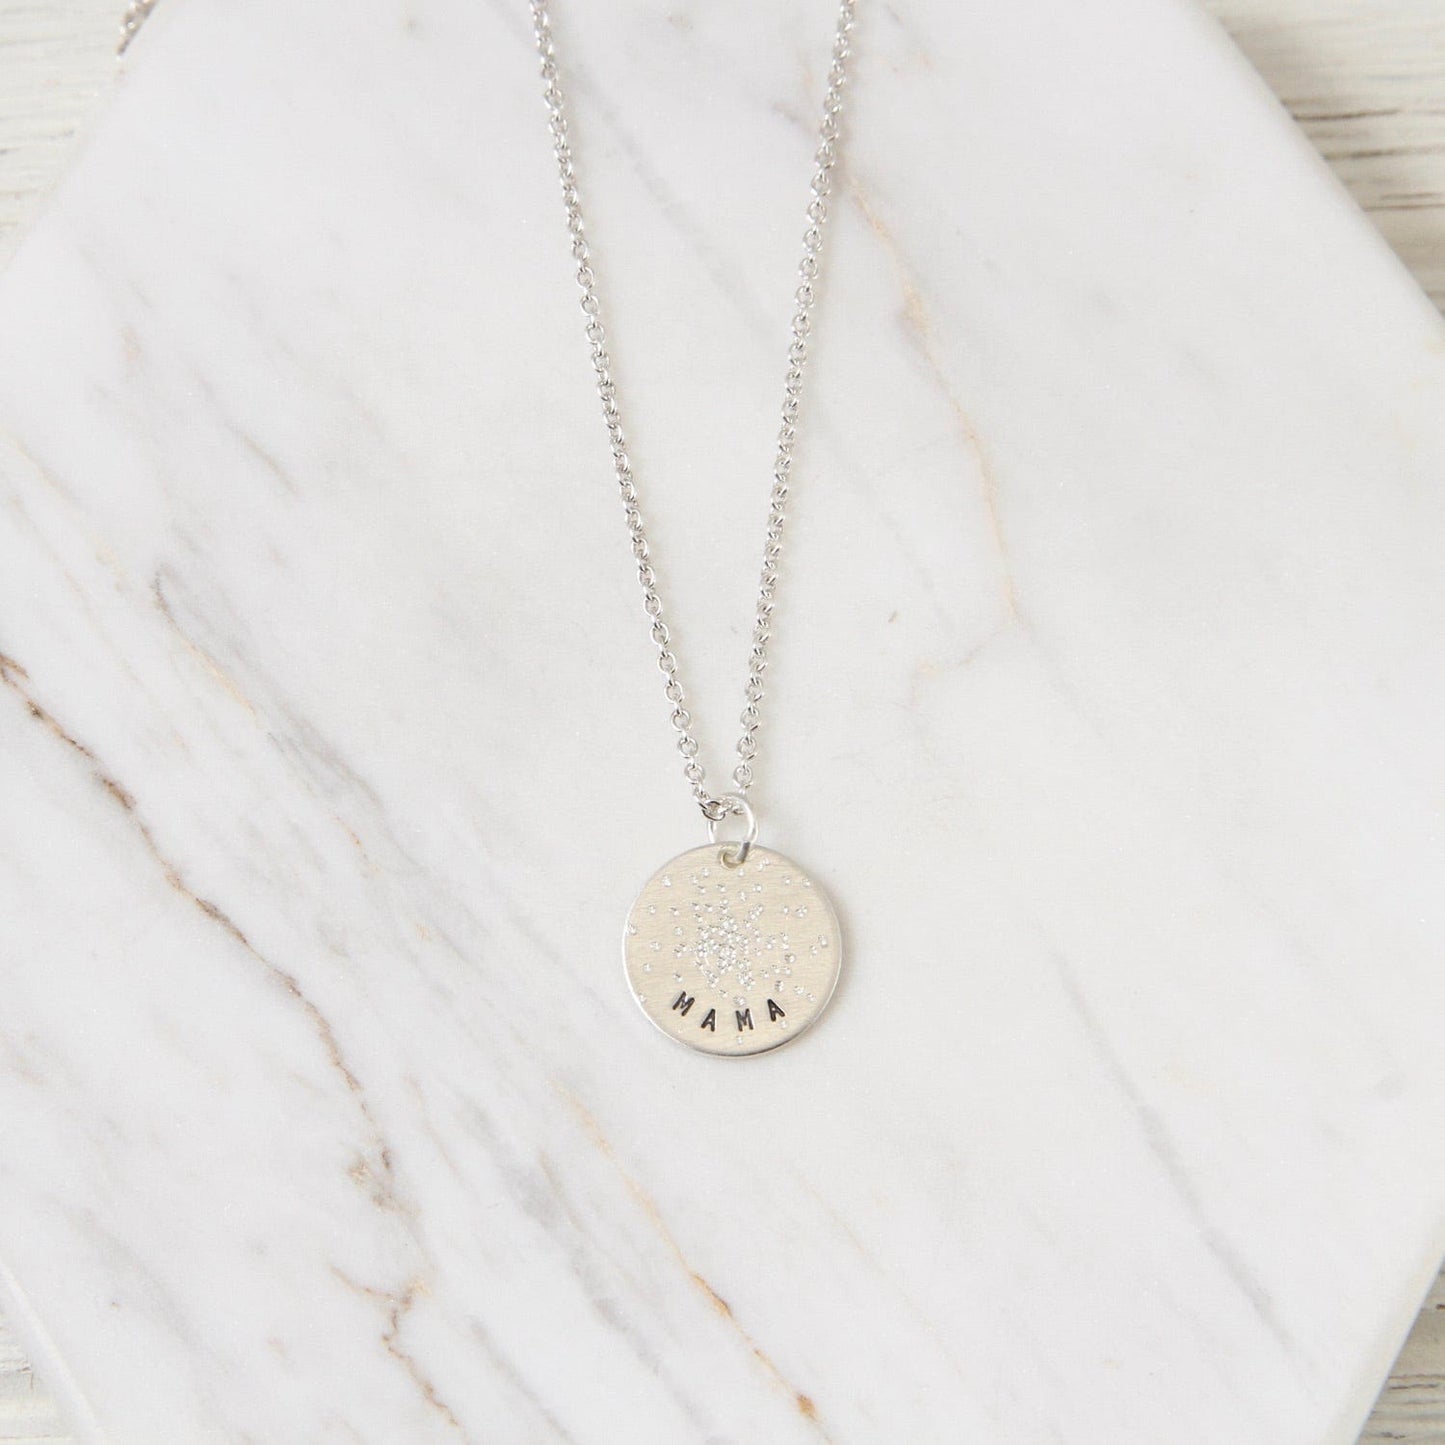 NKL Diamond Dusted Mini Coin Necklace - "Mama"